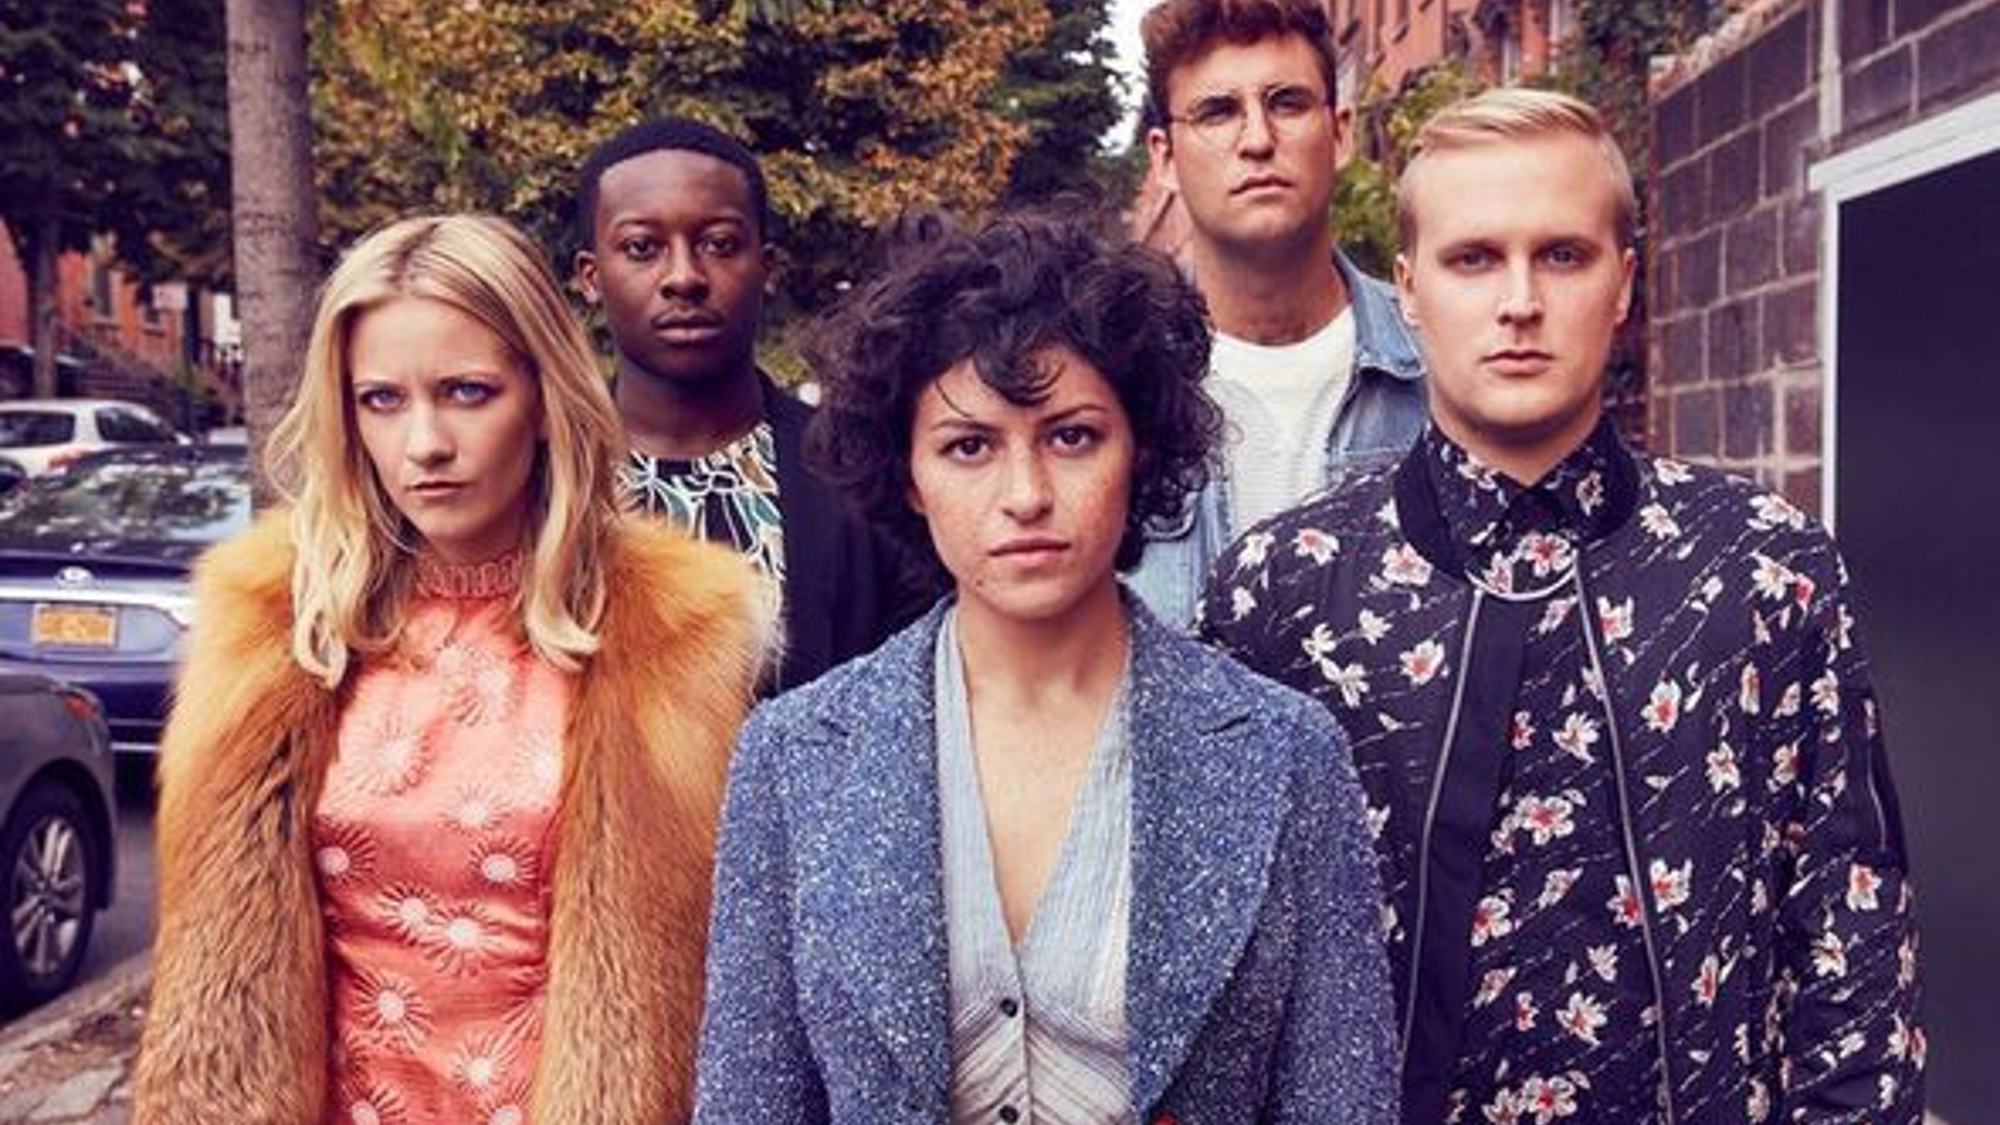 The cast of Search Party